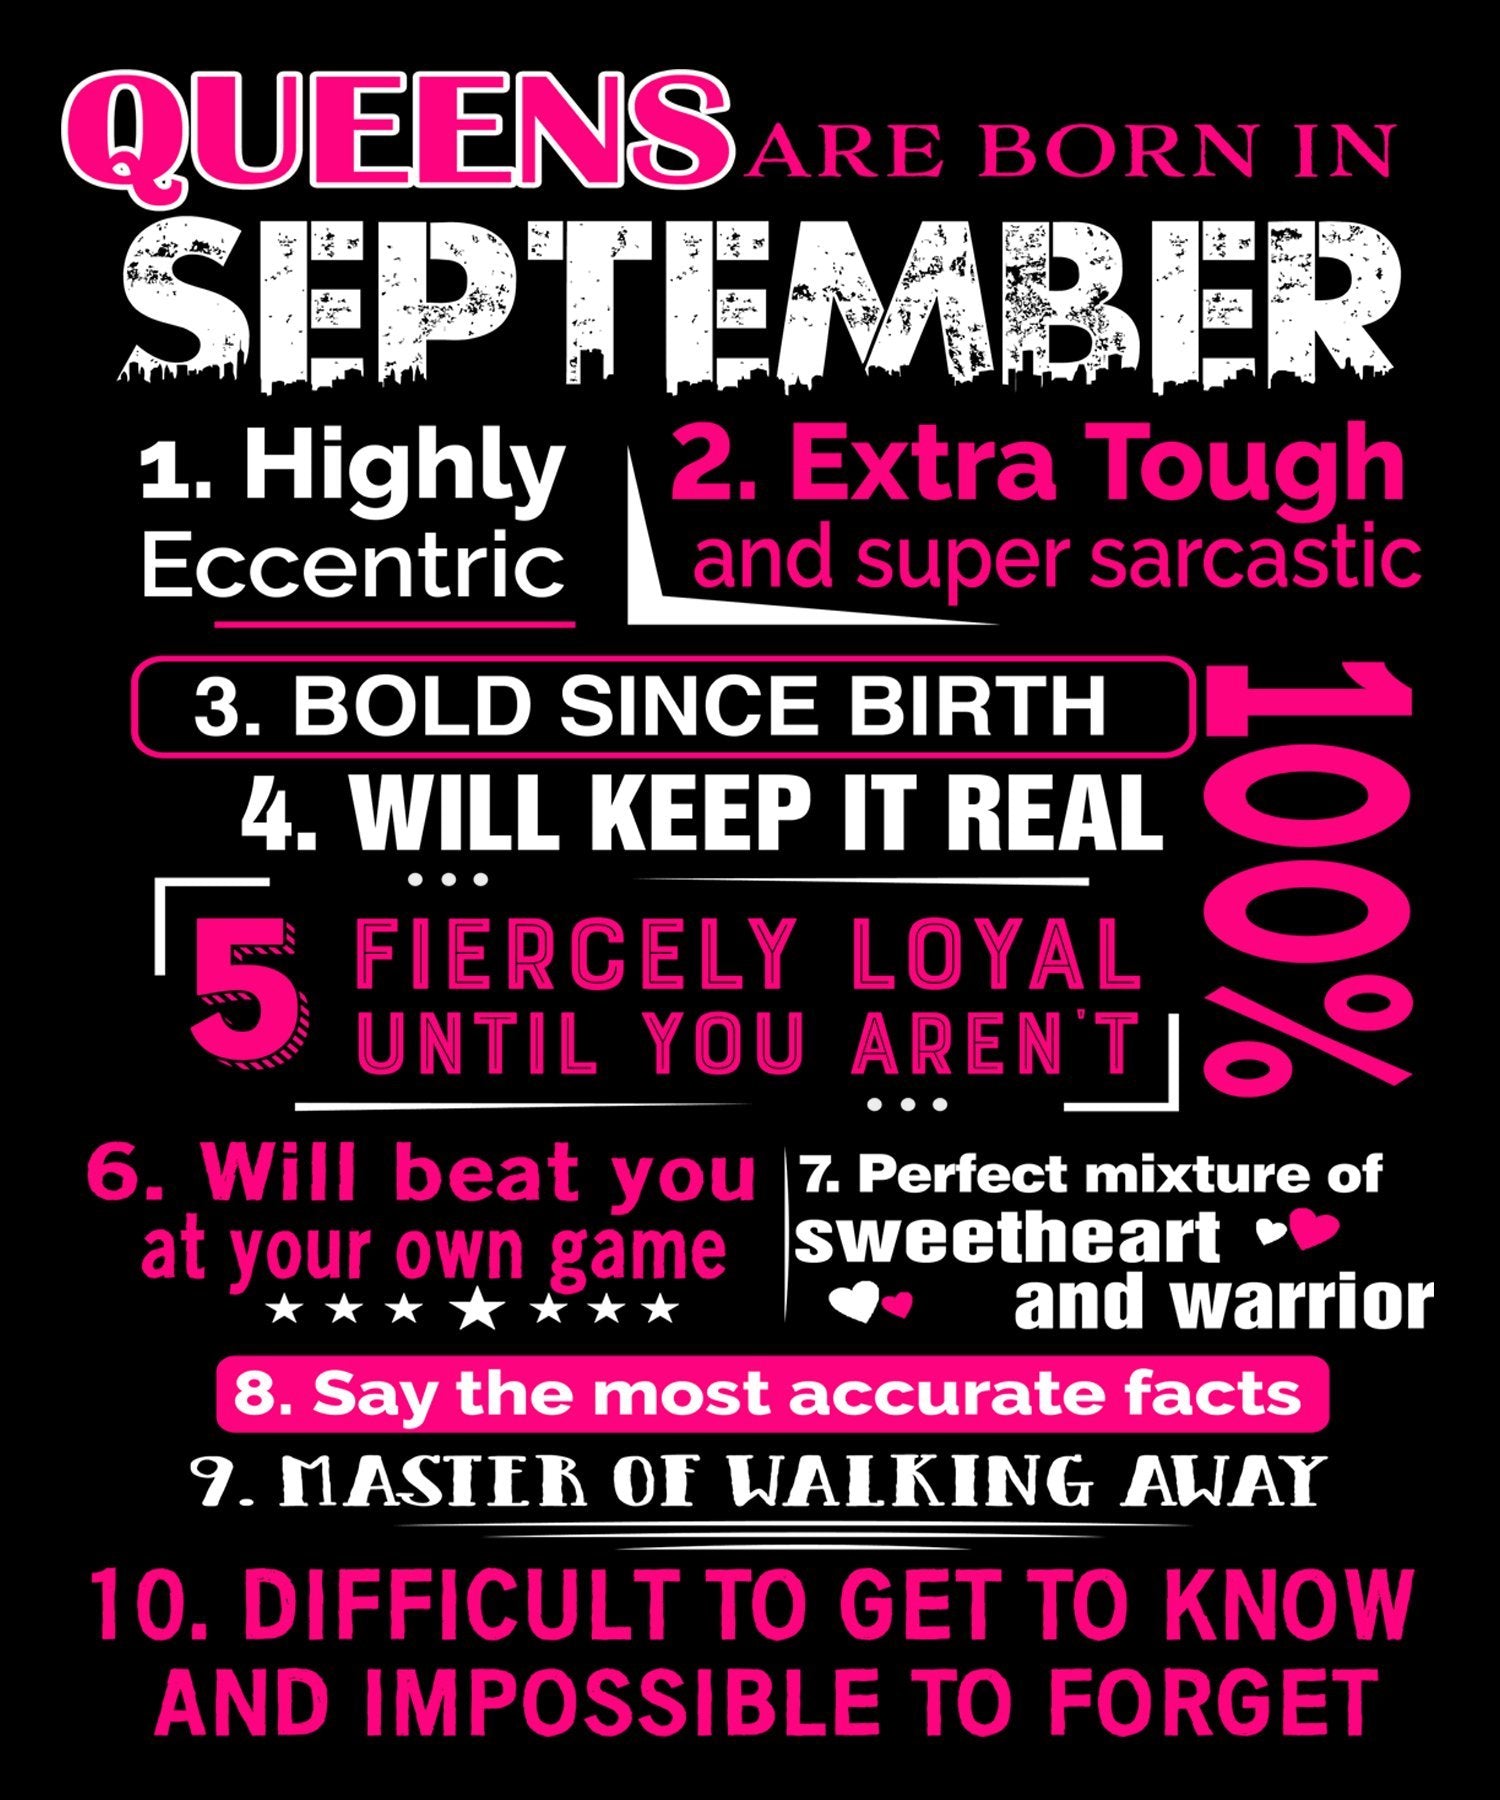 "Queens Are Born In September 10 Reasons"